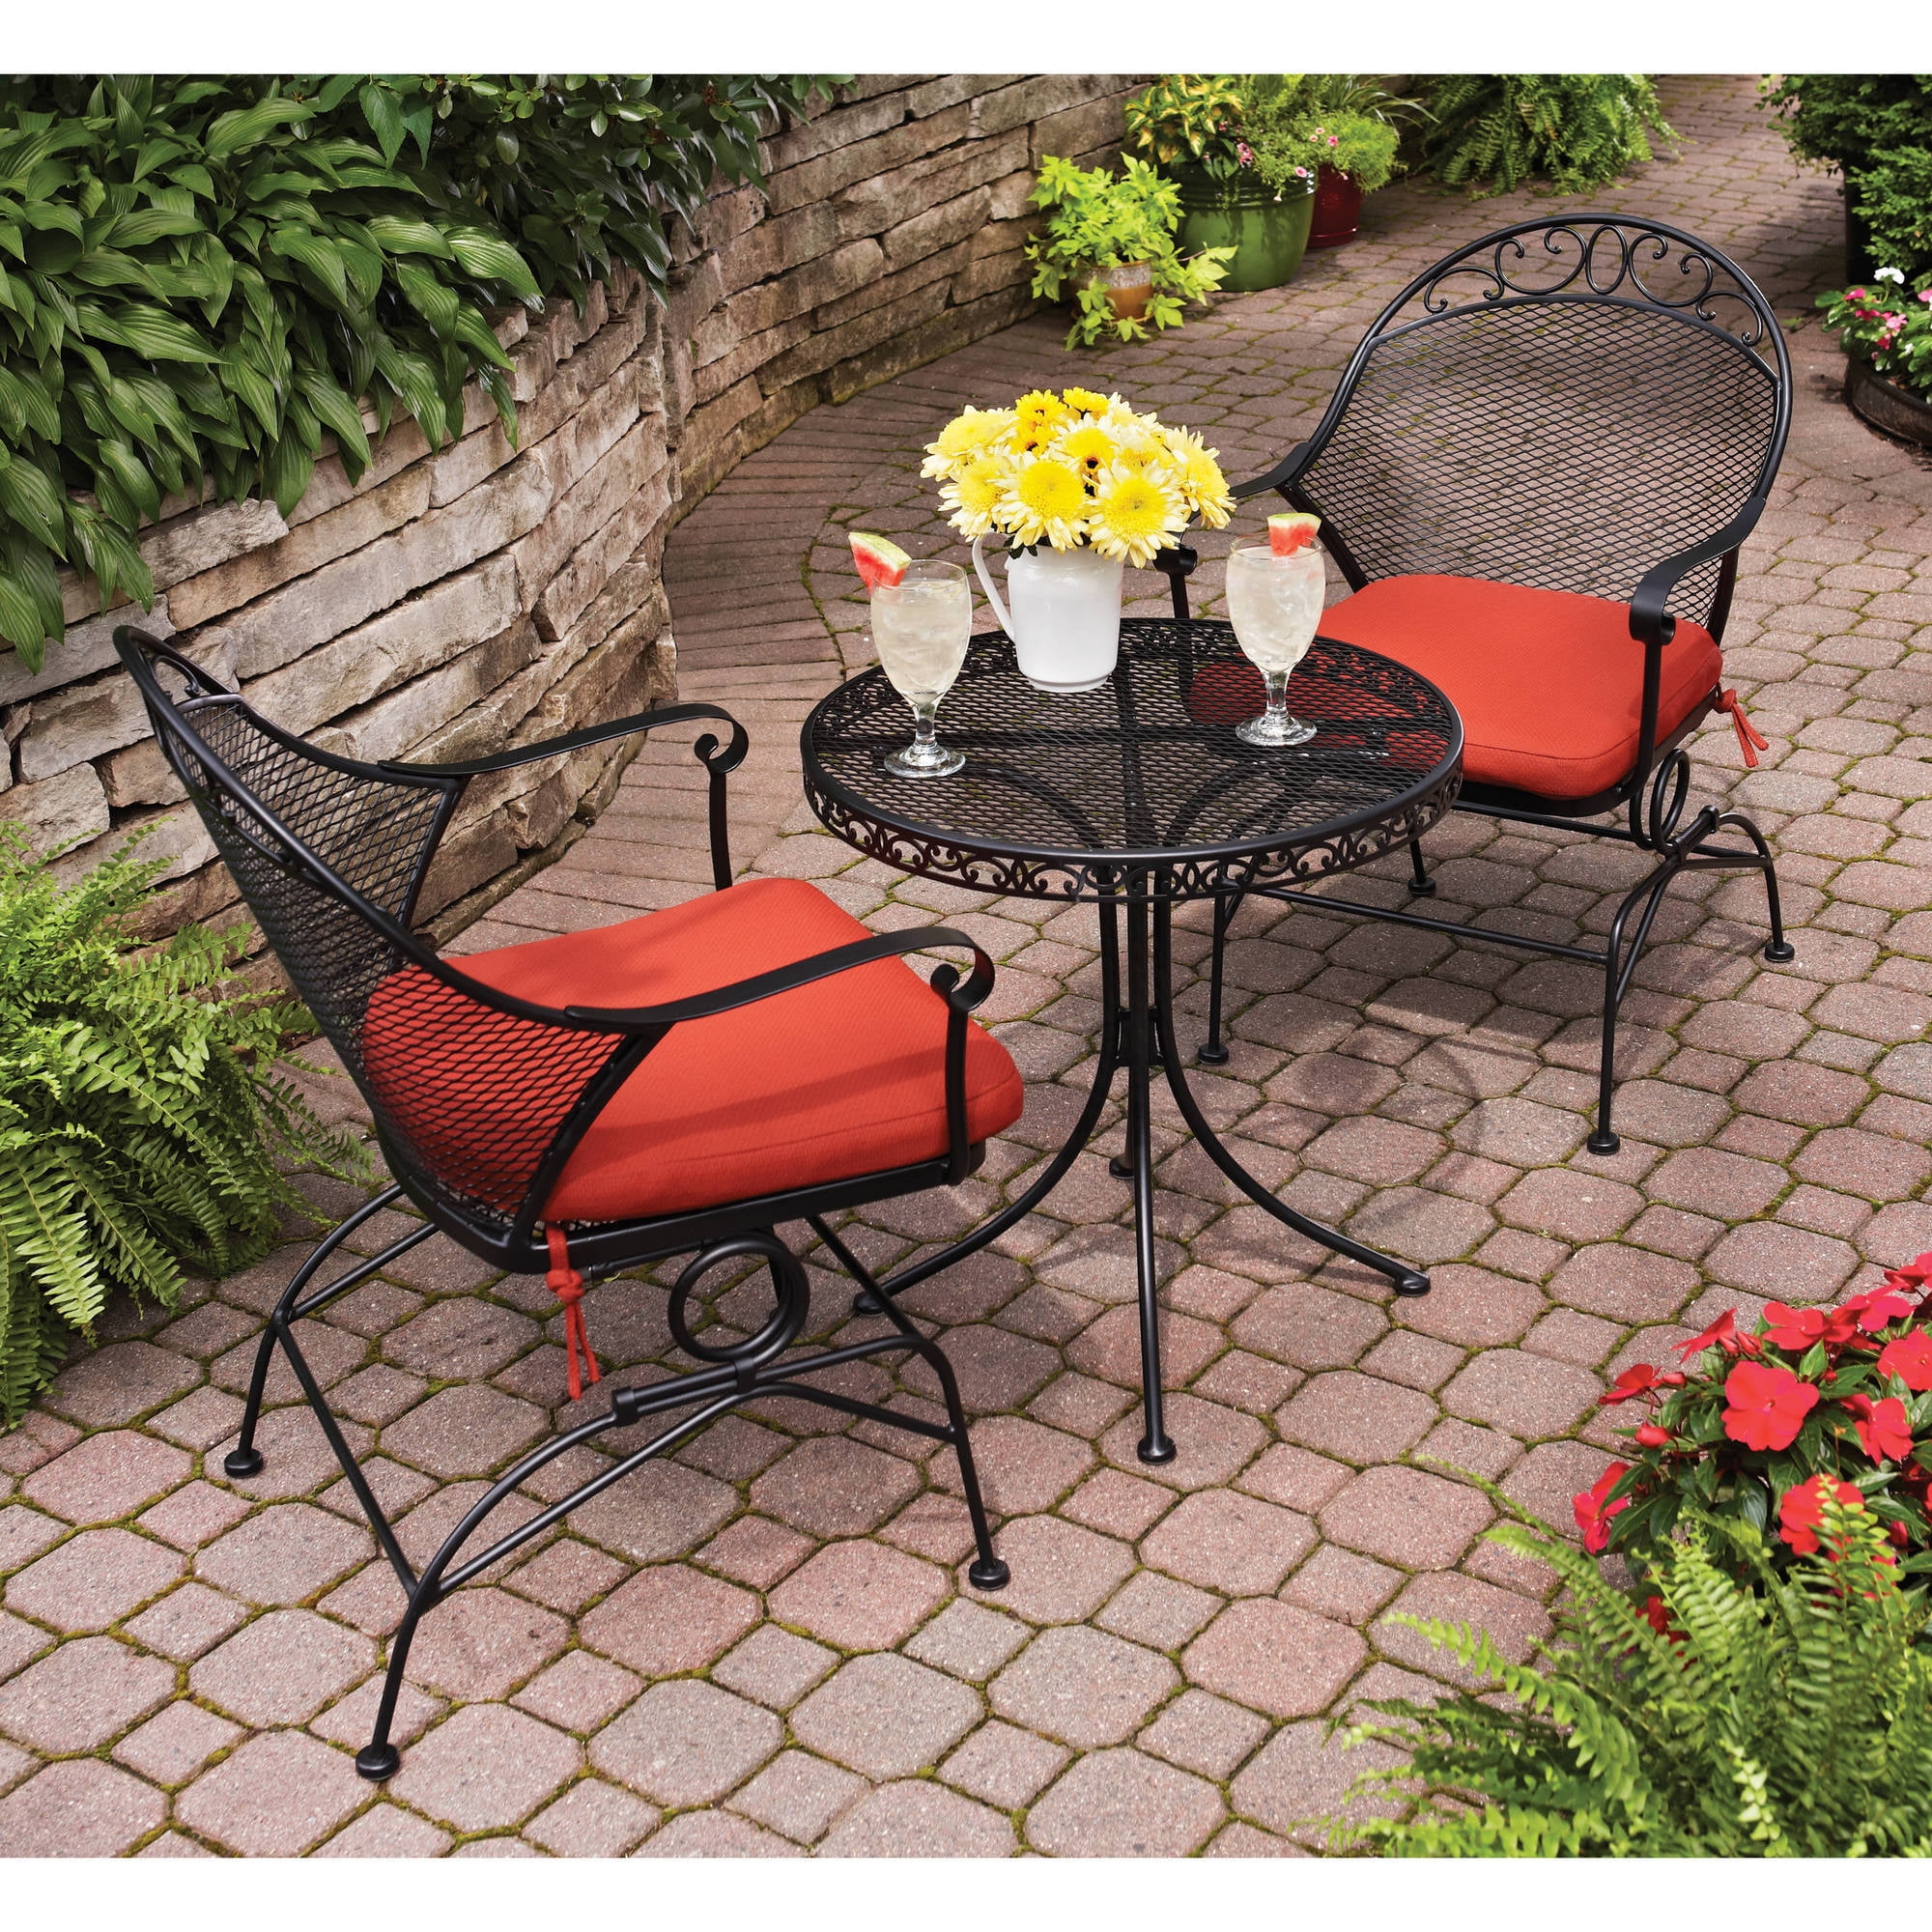 Iron Chairs Outdoor Off 50, Cast Metal Patio Chairs